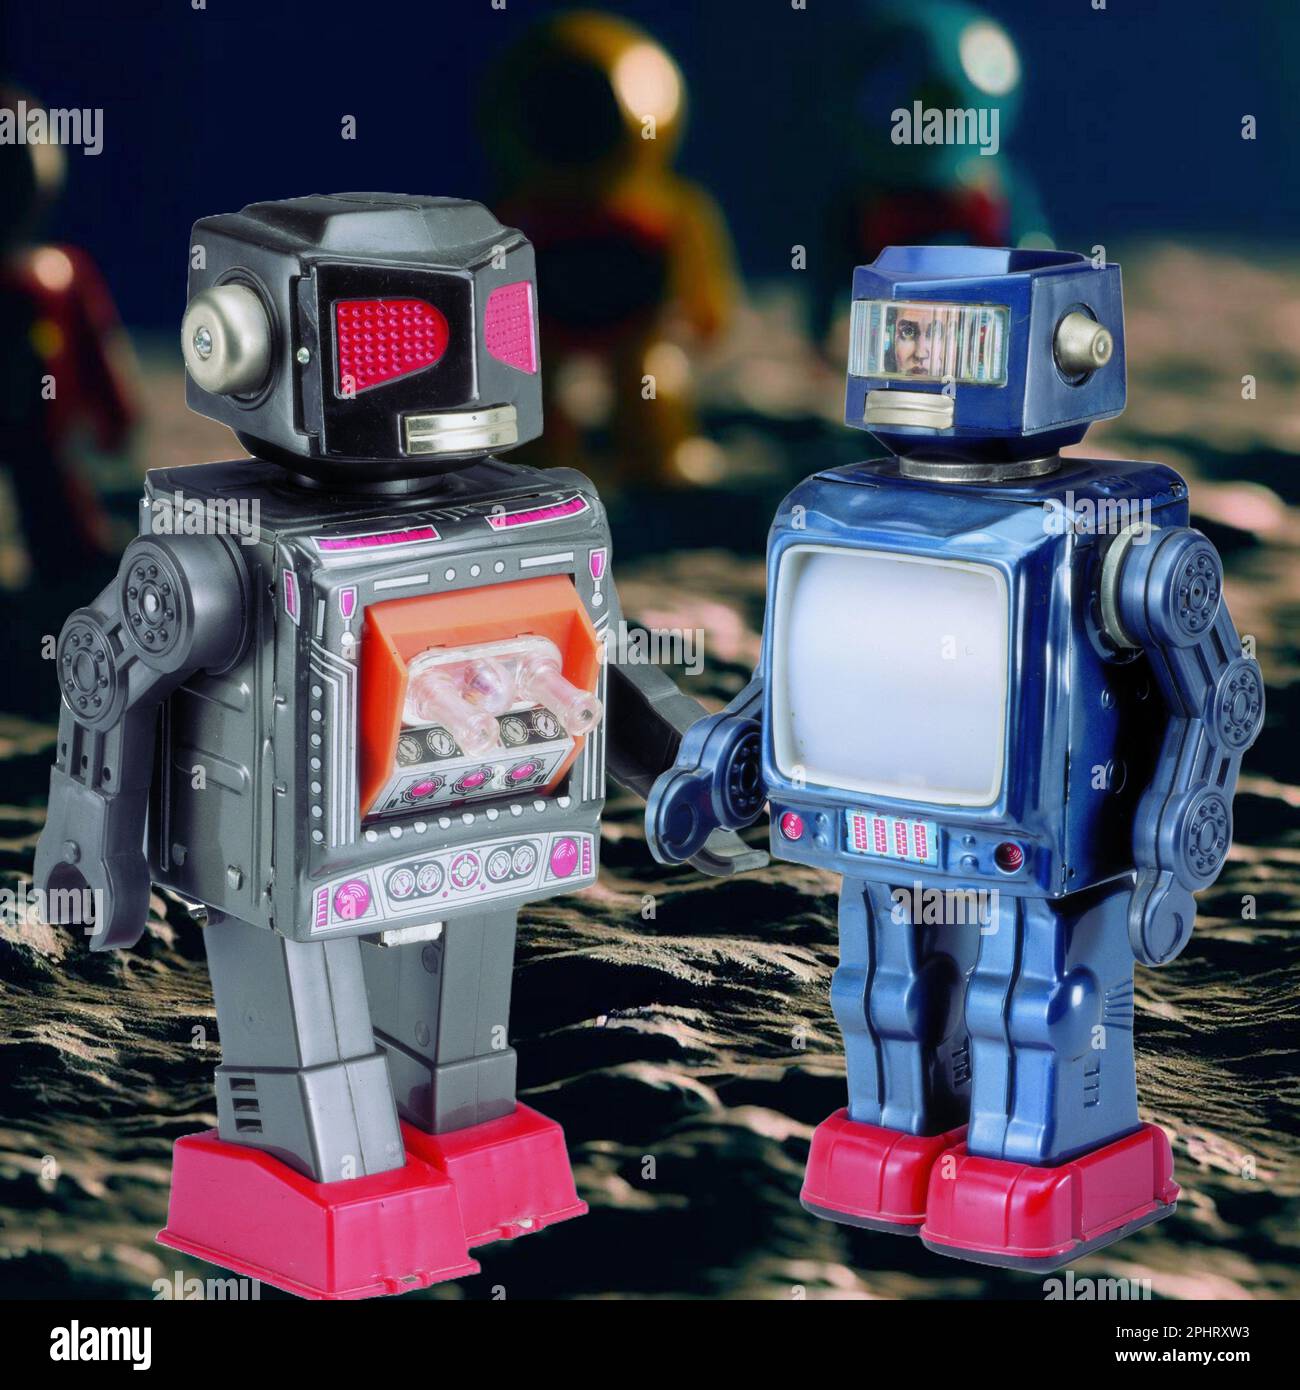 Vintage Toys, two Robot Toys in an imaginative lunar landscape Stock Photo